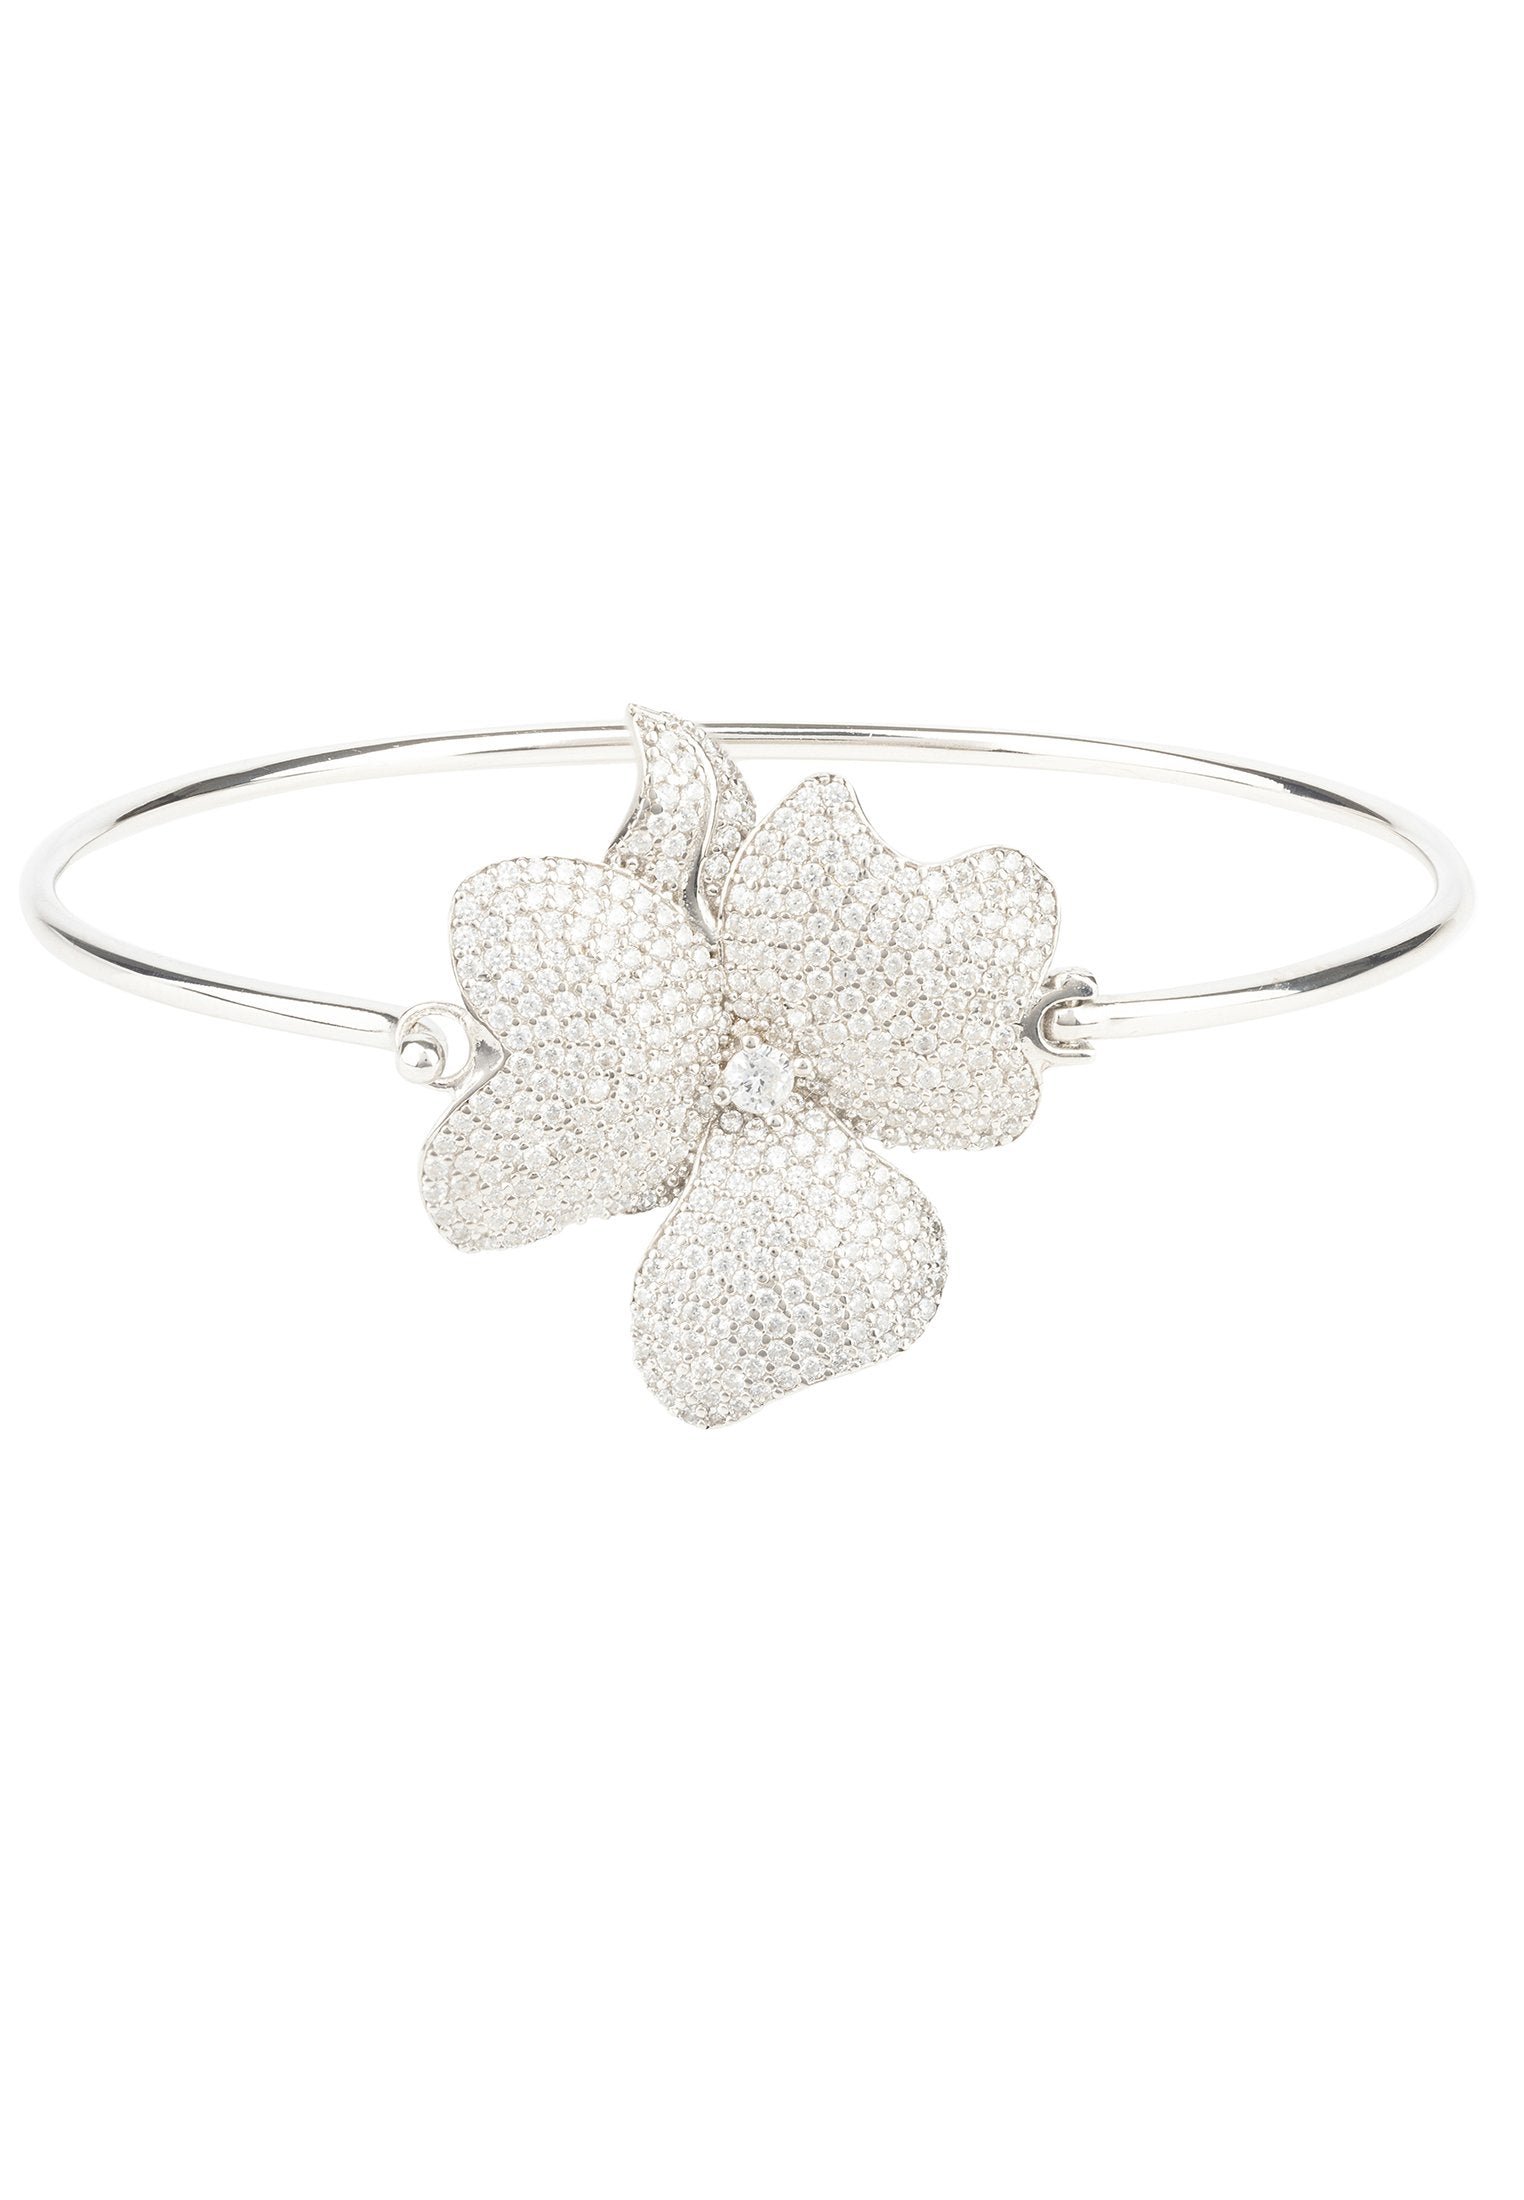 Sterling Silver Flower Statement Bangle with Cubic Zirconia Encrusted Motif - Jewelry & Watches - Bijou Her -  -  - 